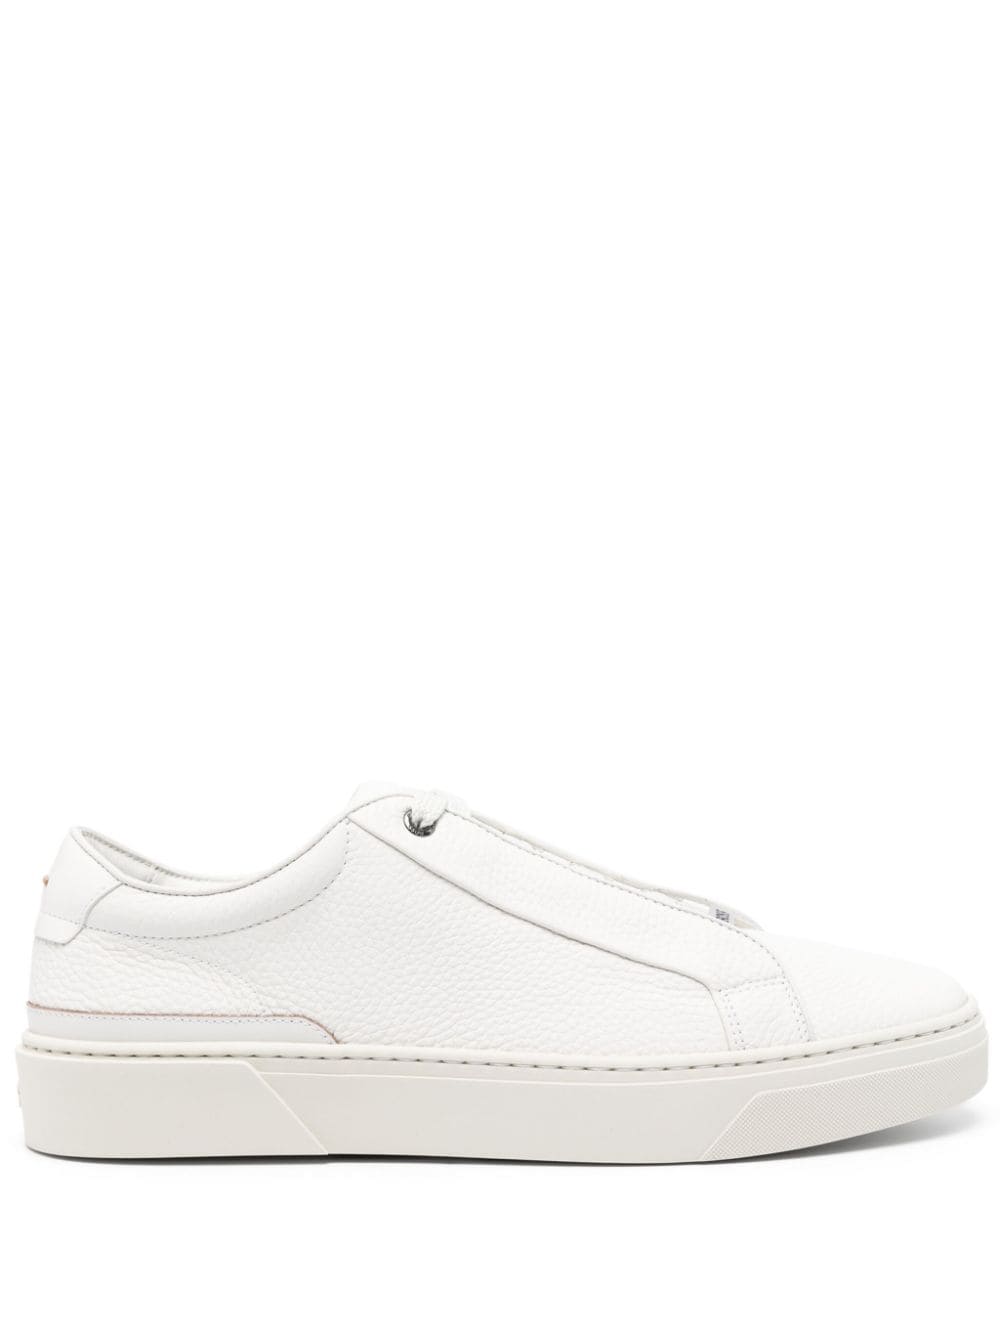 BOSS logo-plaque leather sneakers - White von BOSS